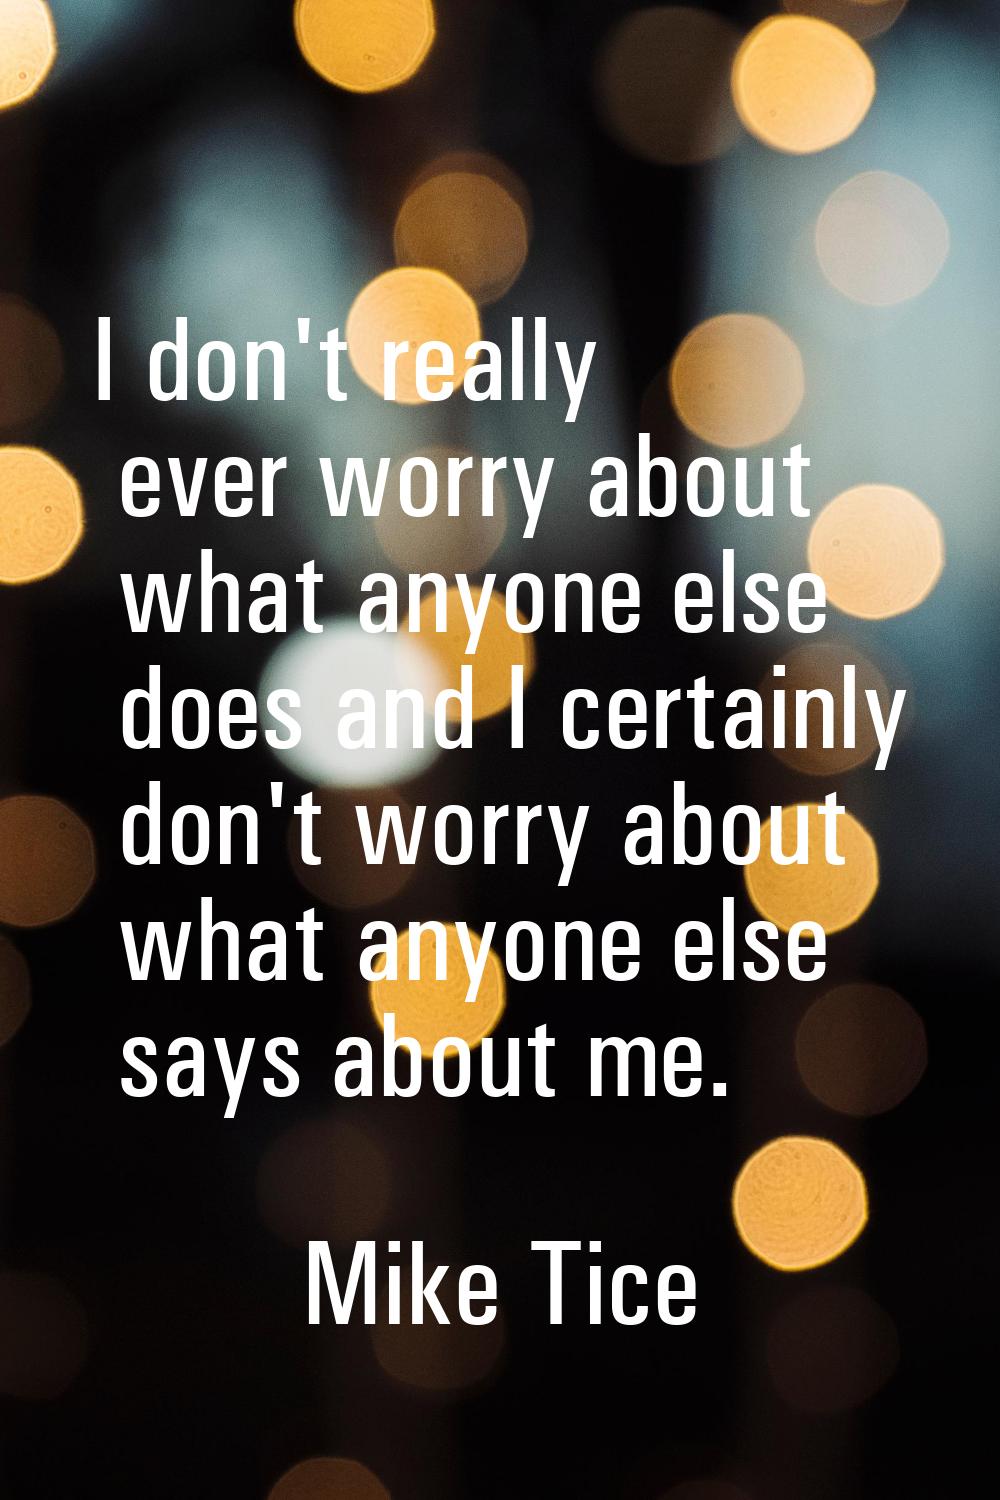 I don't really ever worry about what anyone else does and I certainly don't worry about what anyone